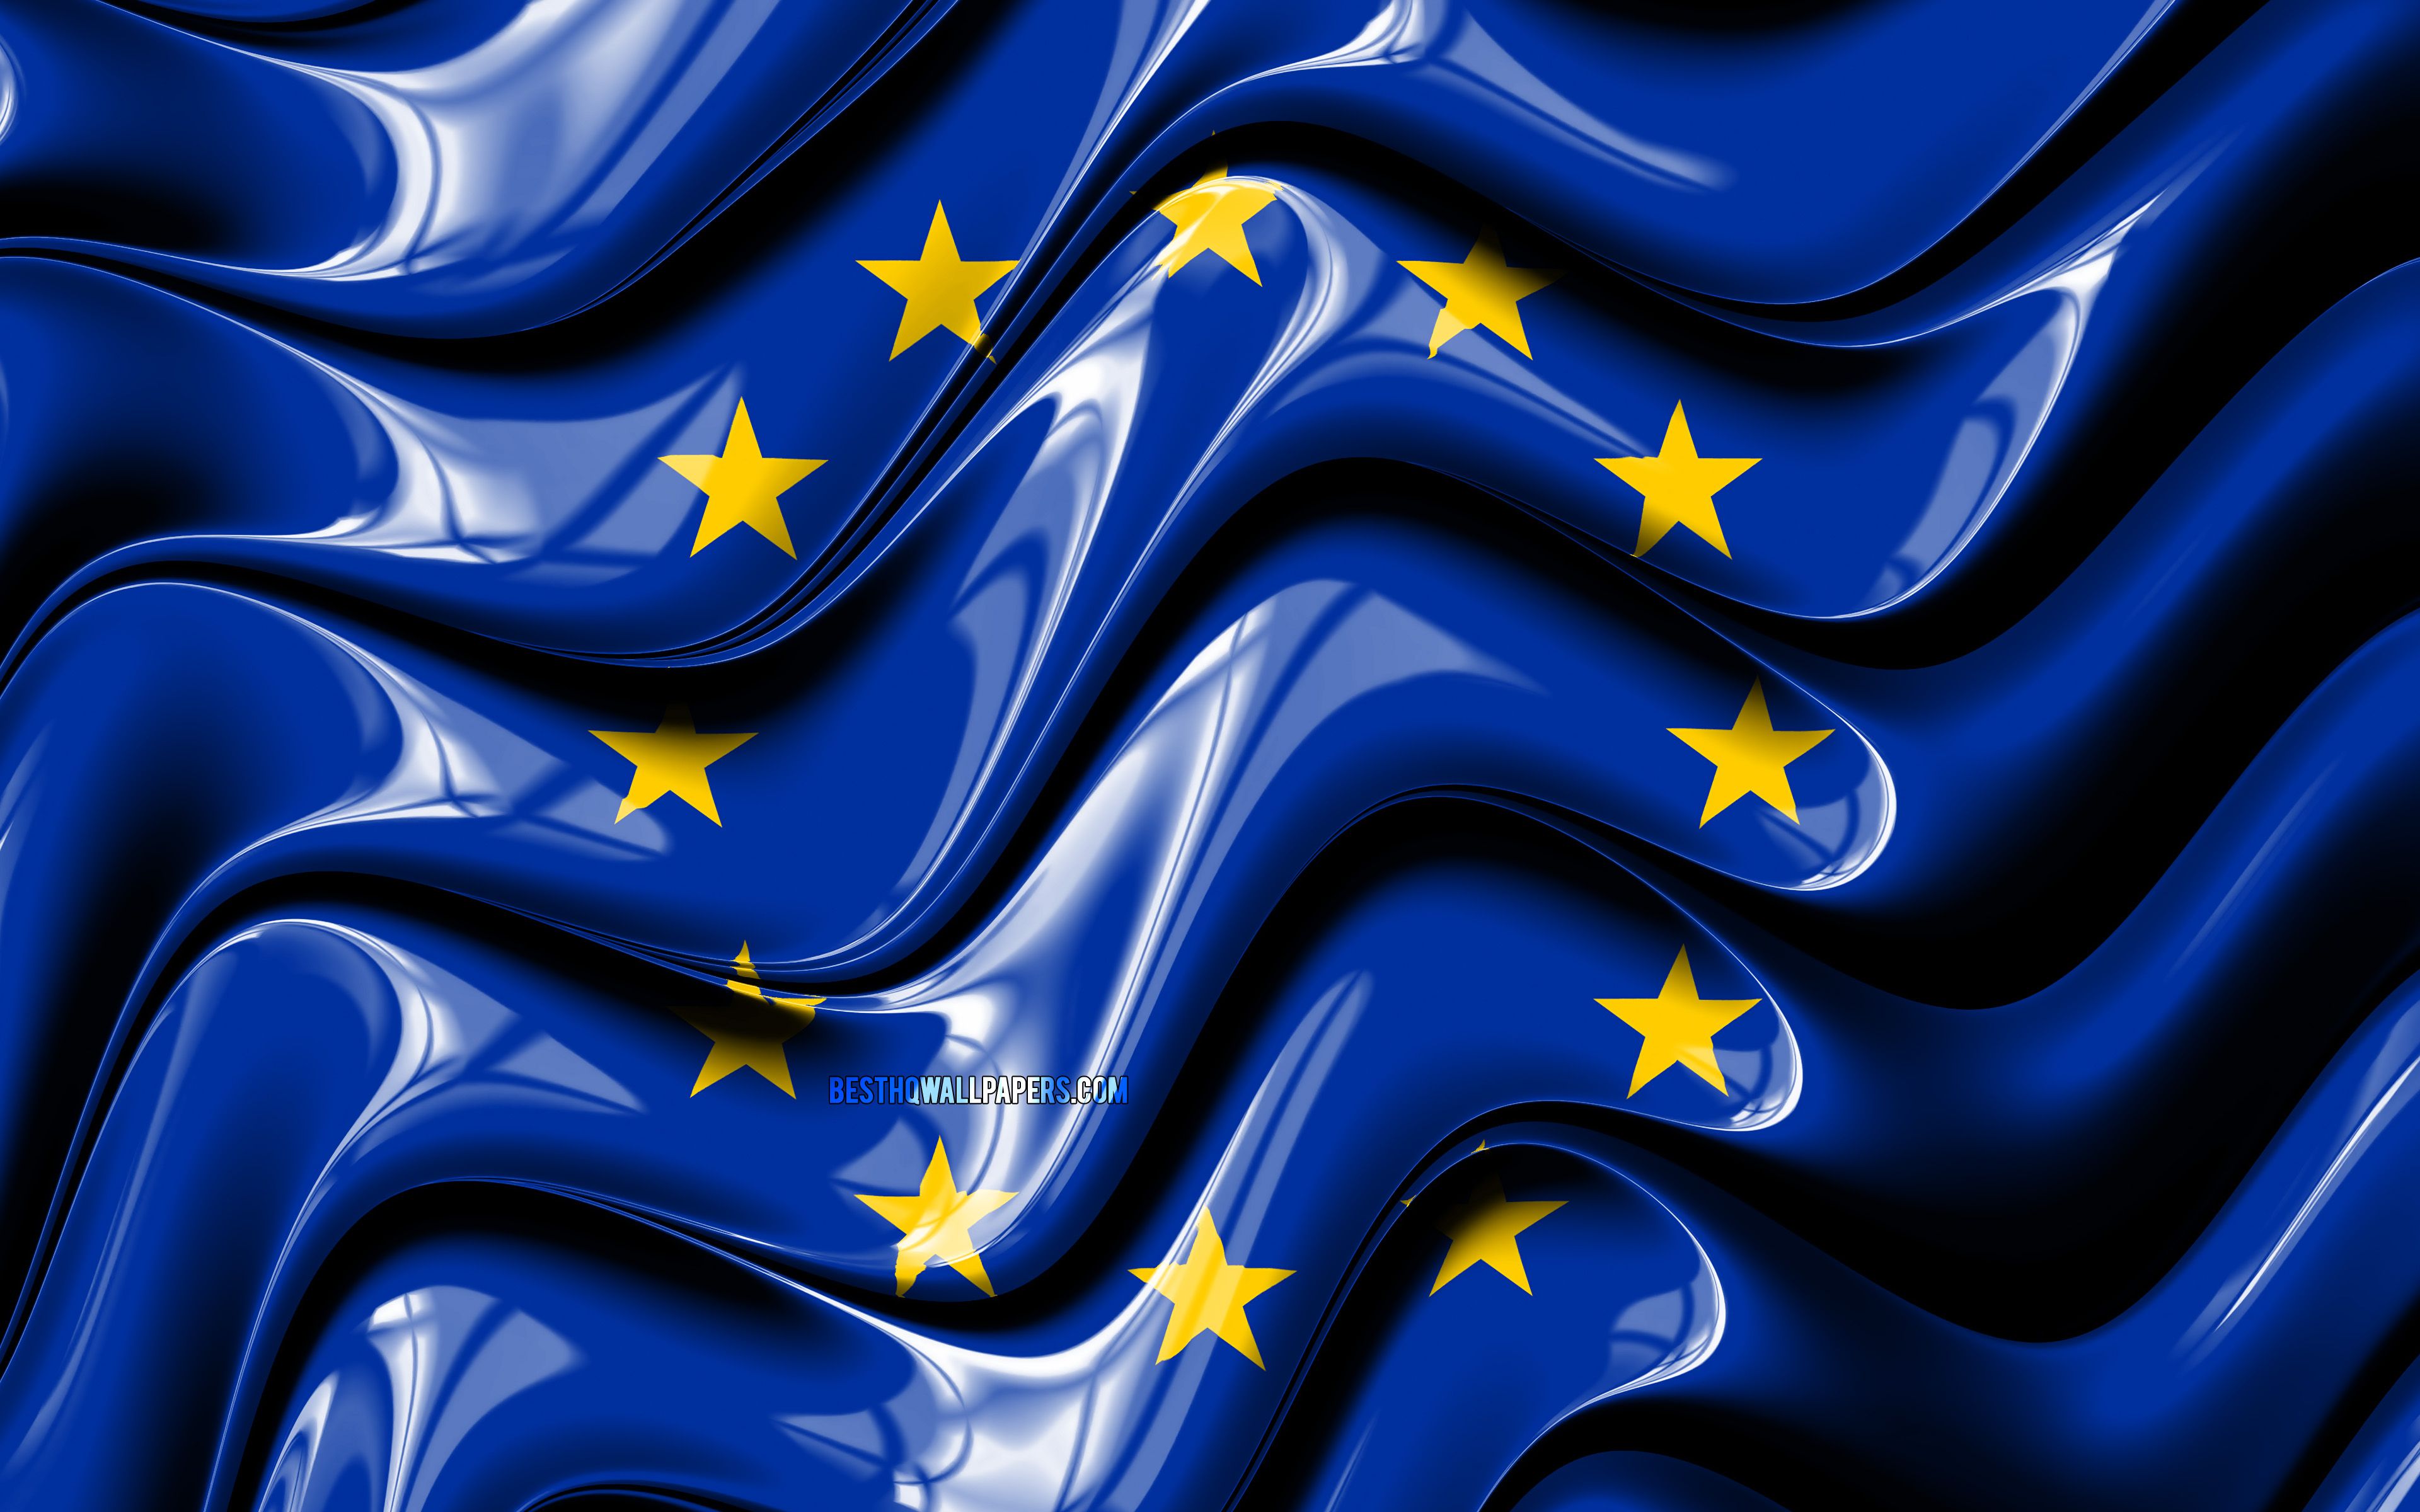 Download wallpaper European Union flag, 4k, Europe, national symbols, Flag of European Union, 3D art, European Union, European countries, European Union 3D flag for desktop with resolution 3840x2400. High Quality HD picture